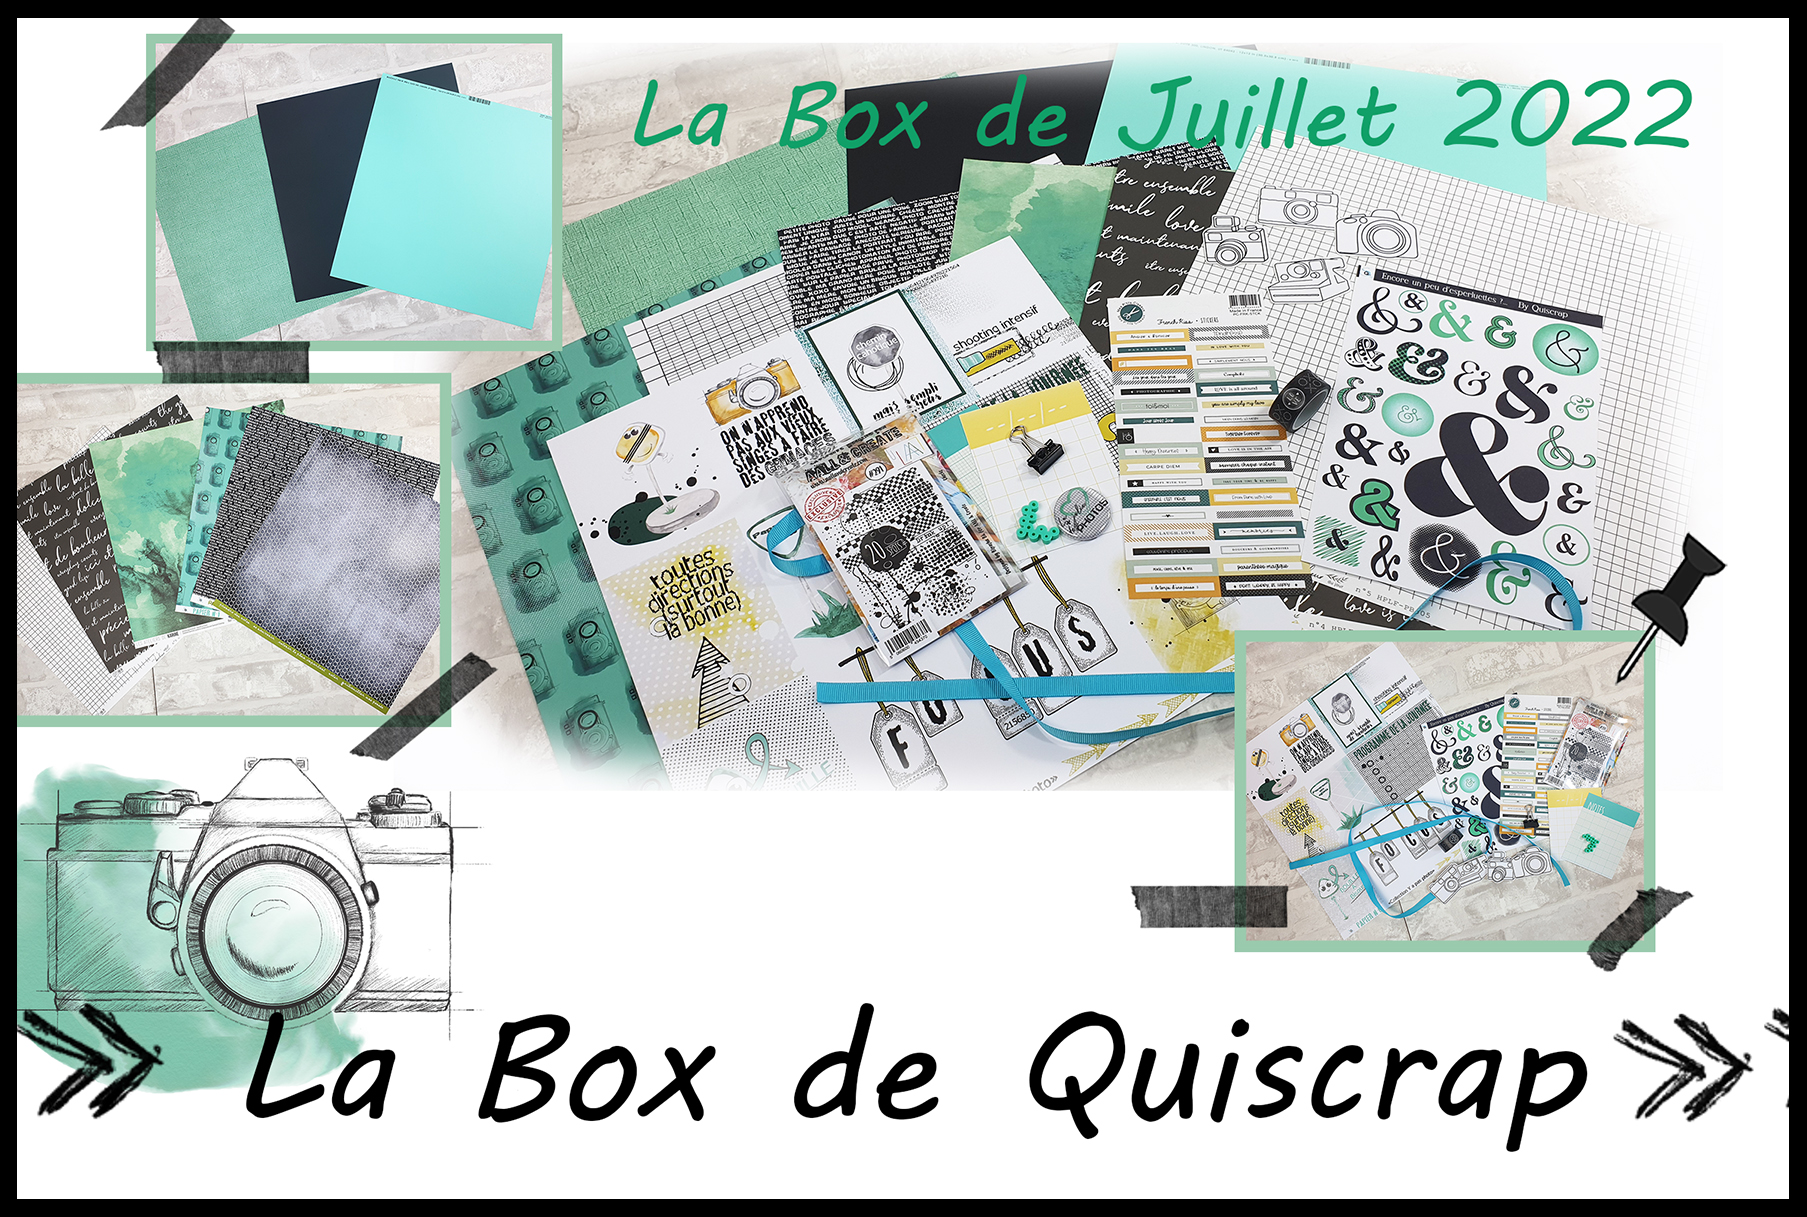 You are currently viewing La Box de Juillet 2022